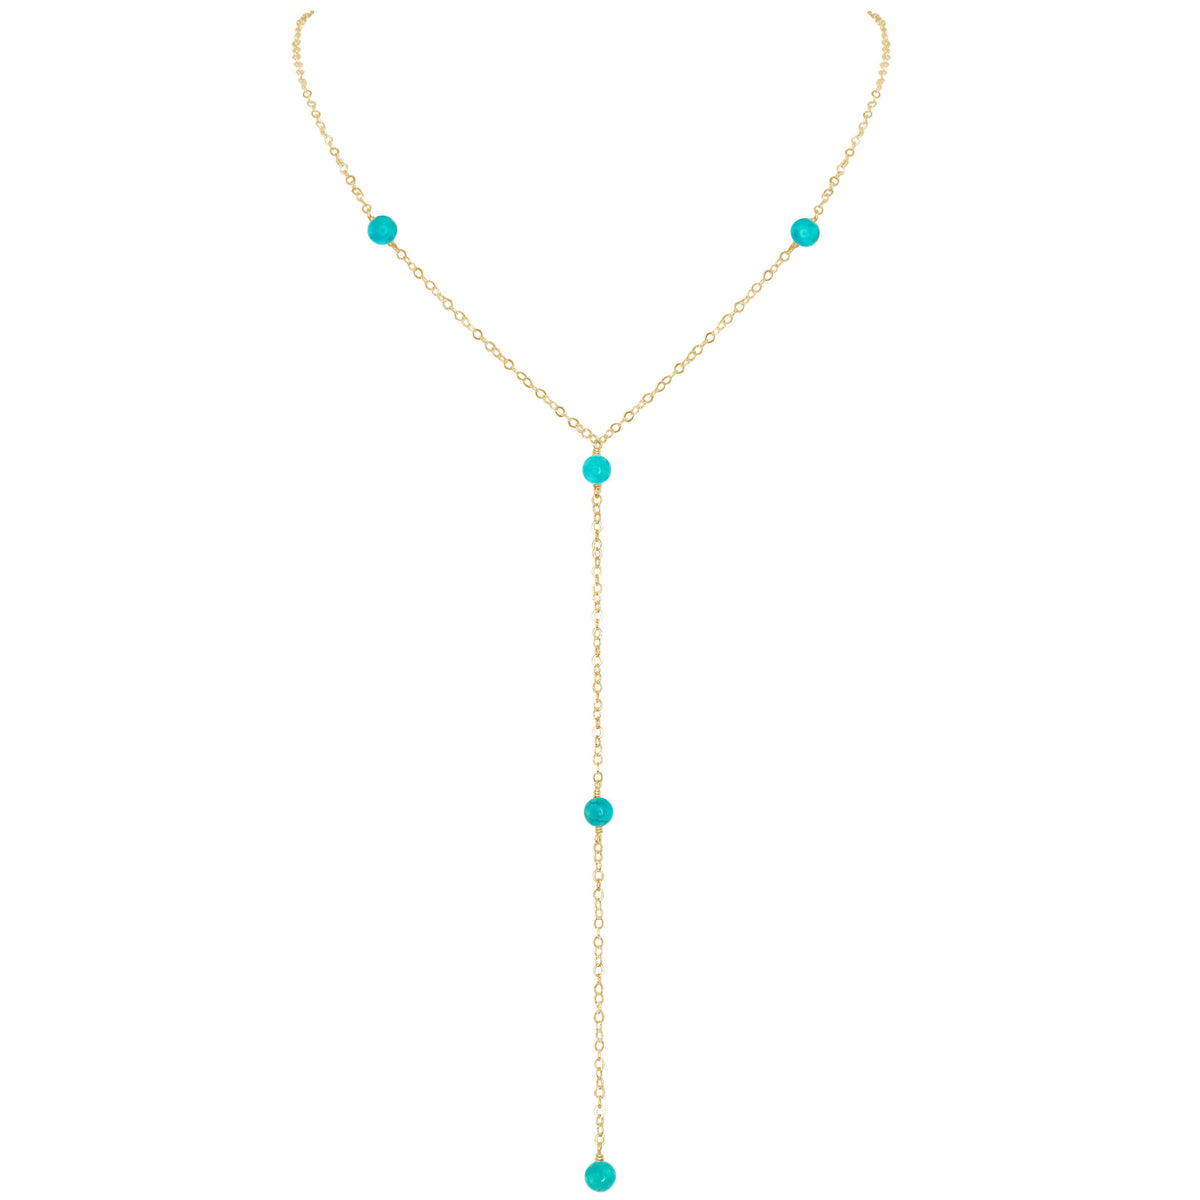 Dainty Y Necklace - Turquoise - 14K Gold Fill - Luna Tide Handmade Jewellery